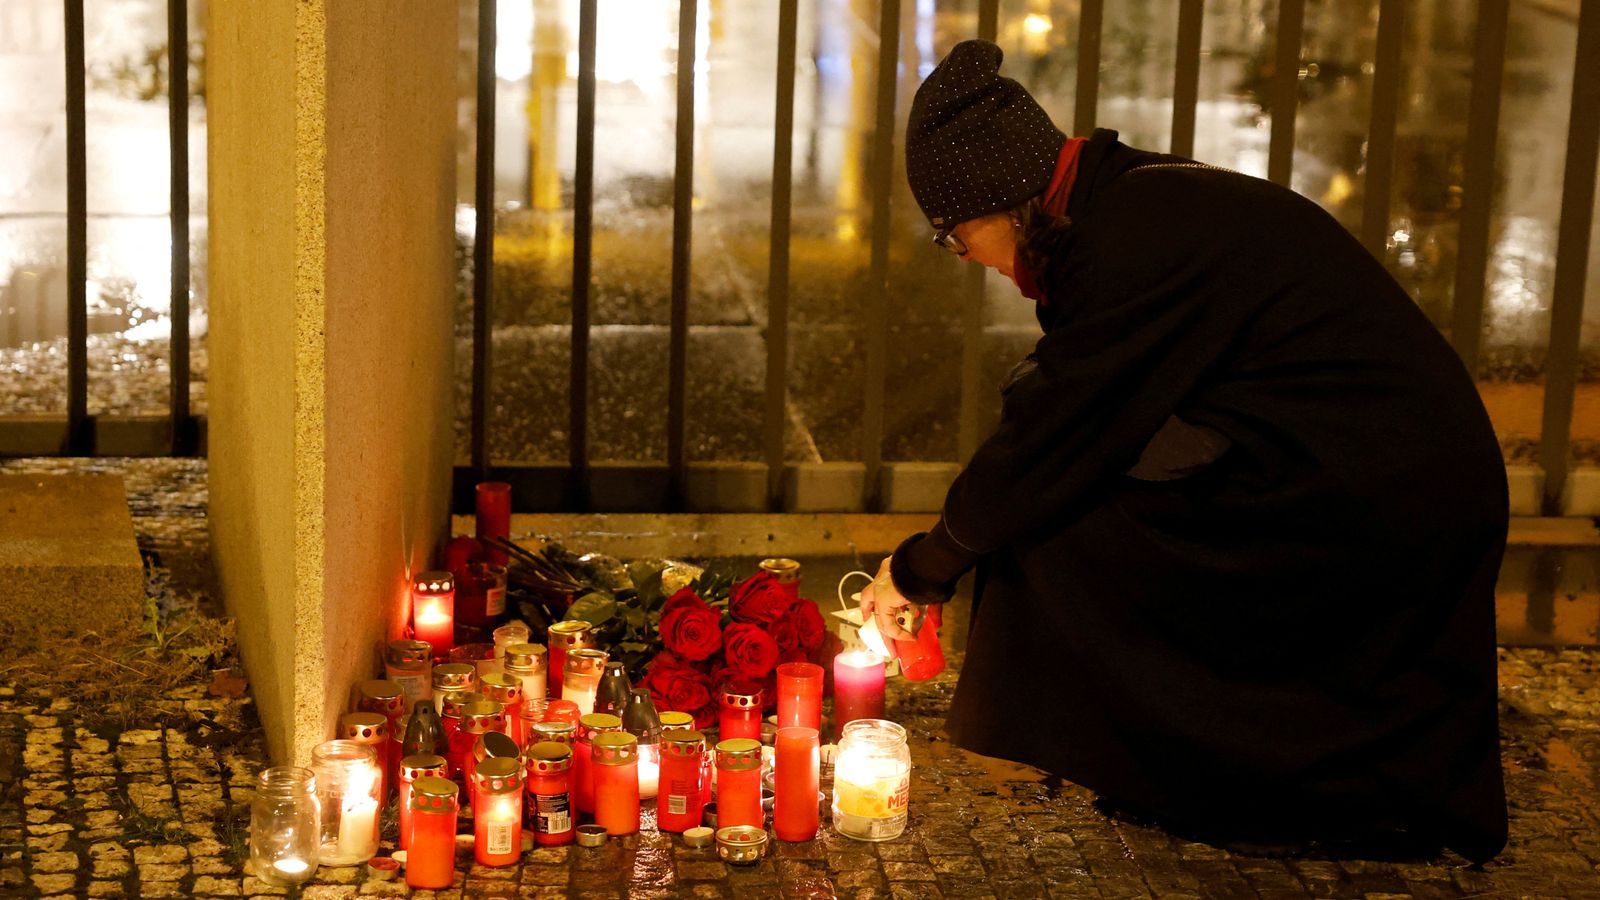 Prague shooting: Day of mourning declared after 14 killed - as suspect linked to separate murder